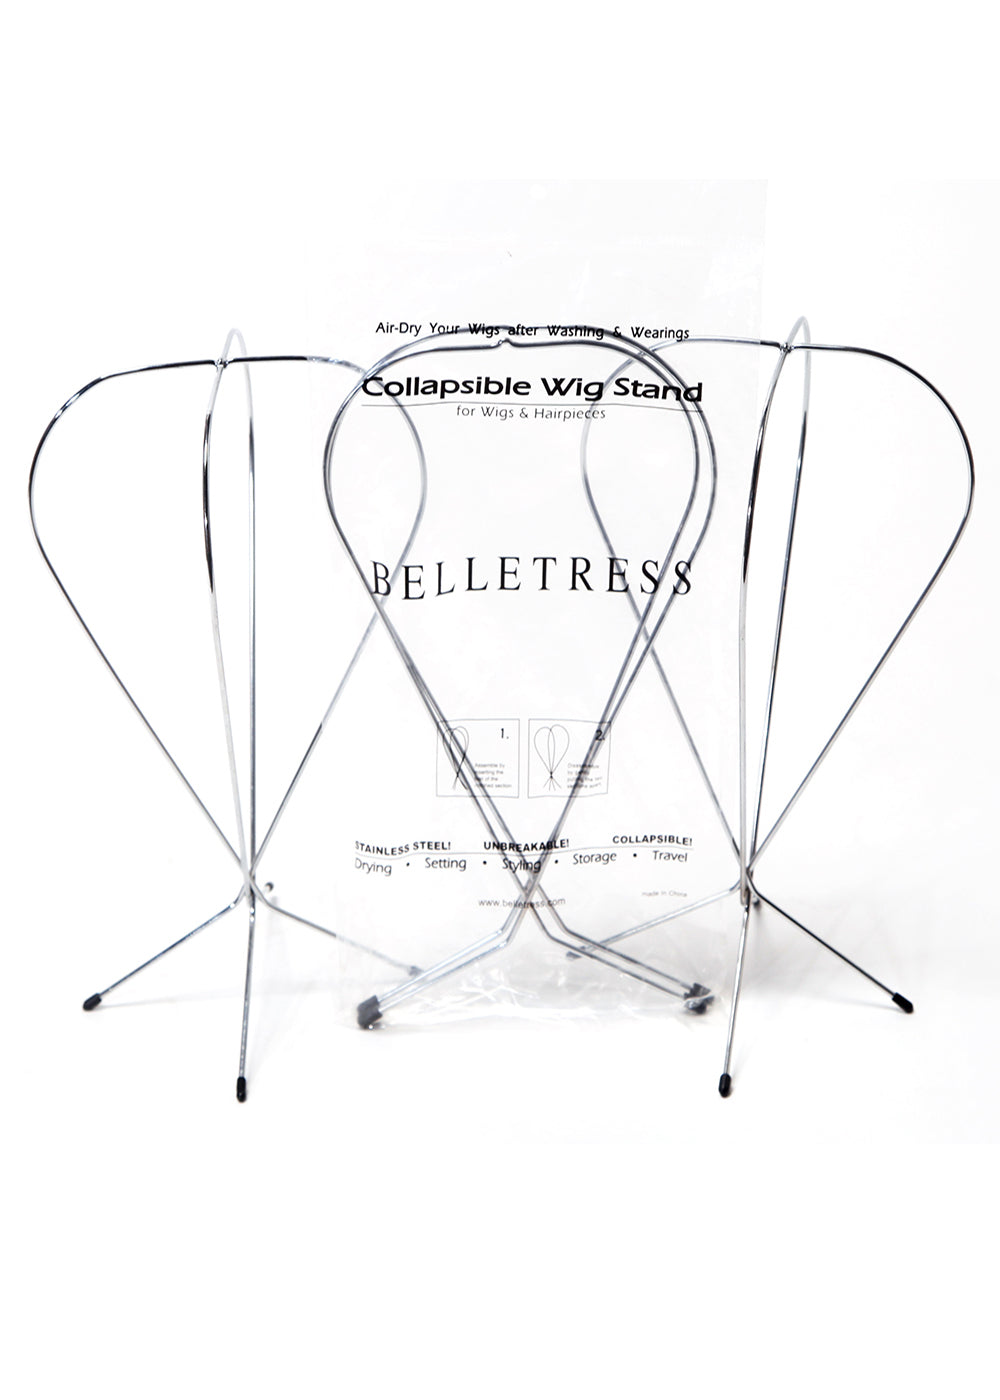 COLLAPSIBLE WIG STAND